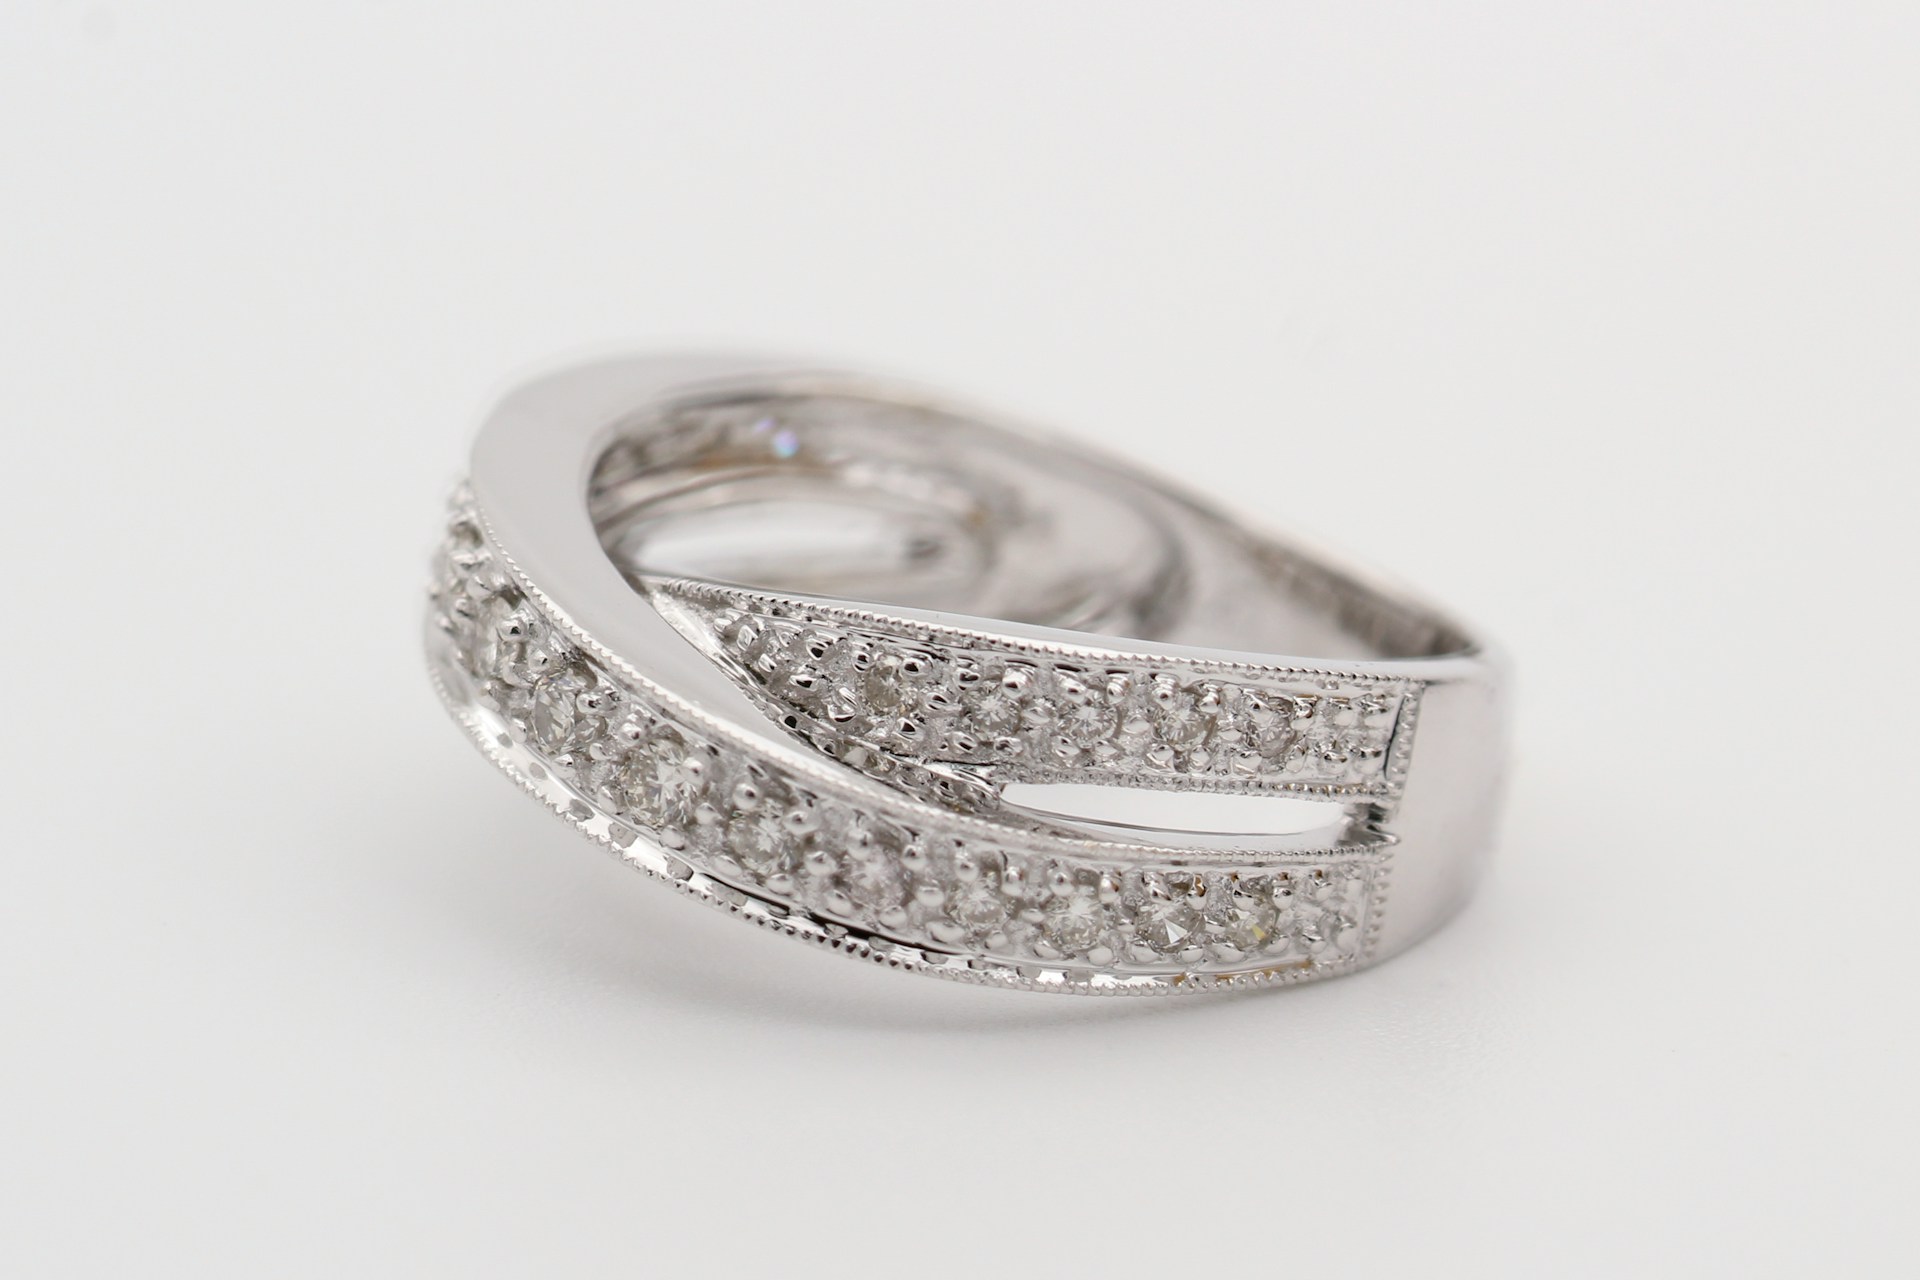 a white gold fashion ring featuring overlapping bands and diamond accents